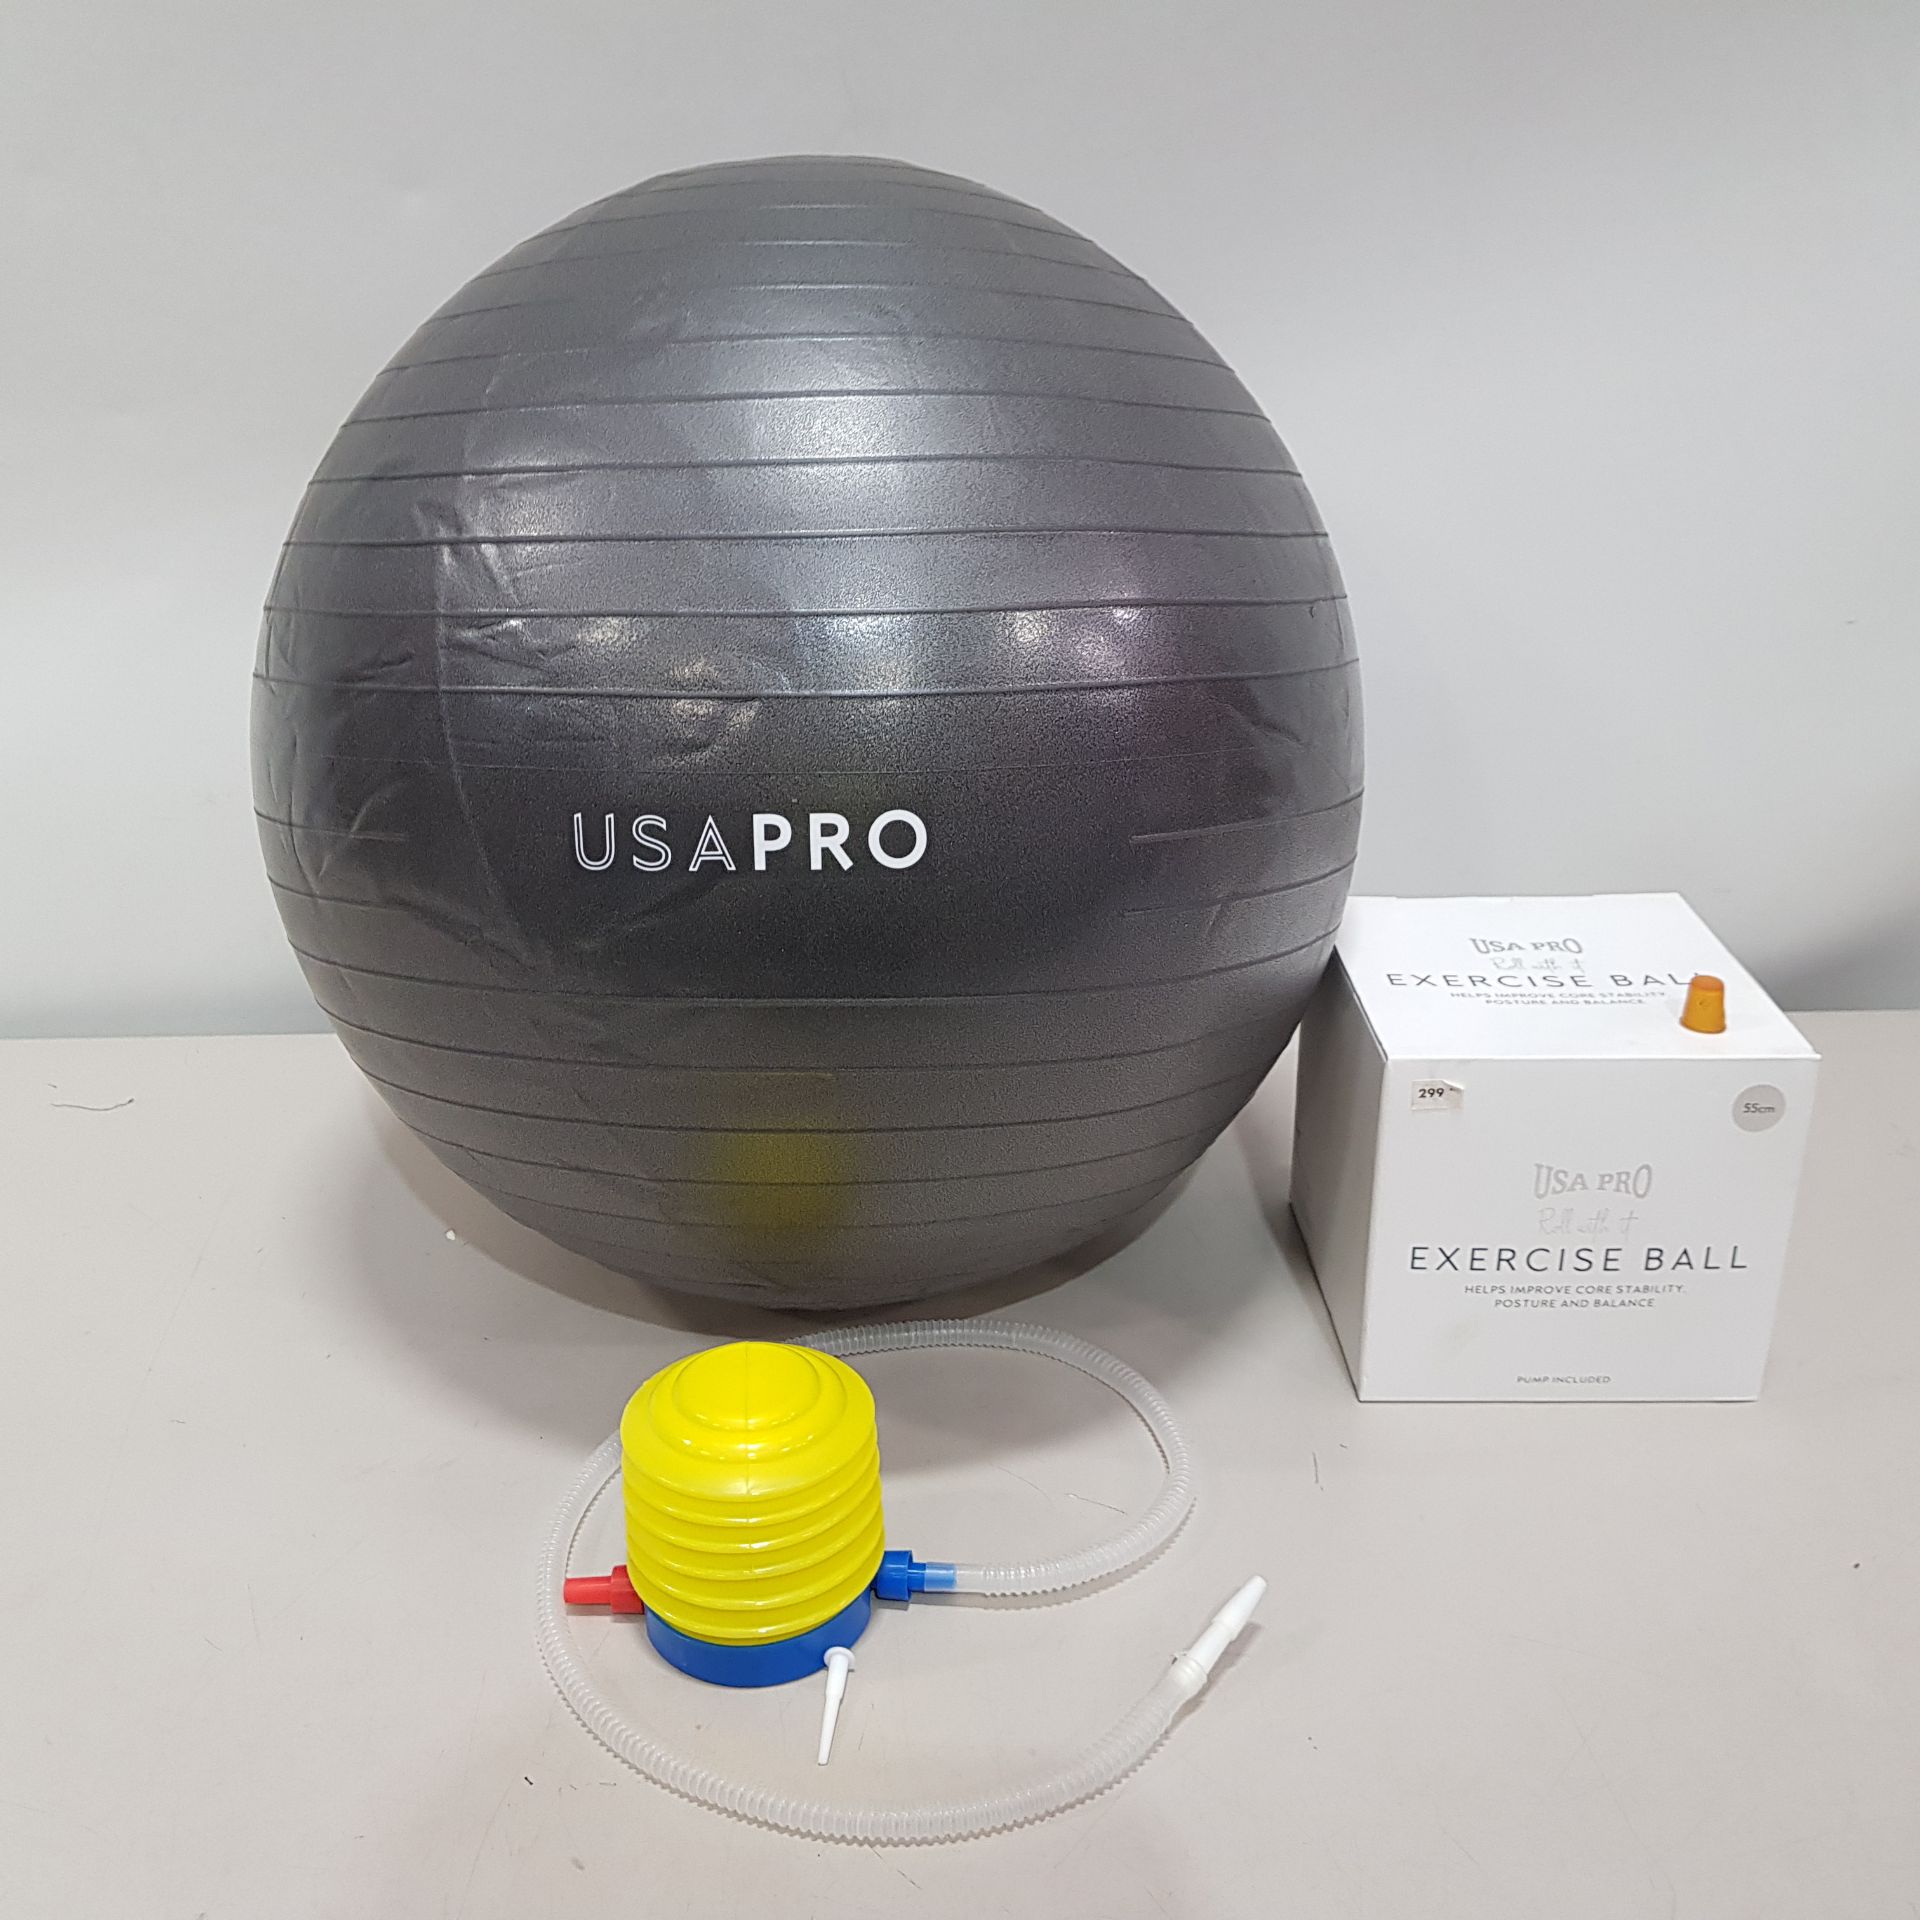 60 X BRAND NEW USA PRO EXERCISE BALL - INCLUDES PUMP - ALL IN SIZE 55 CM - RRP £ 15.99 EACH - IN 5